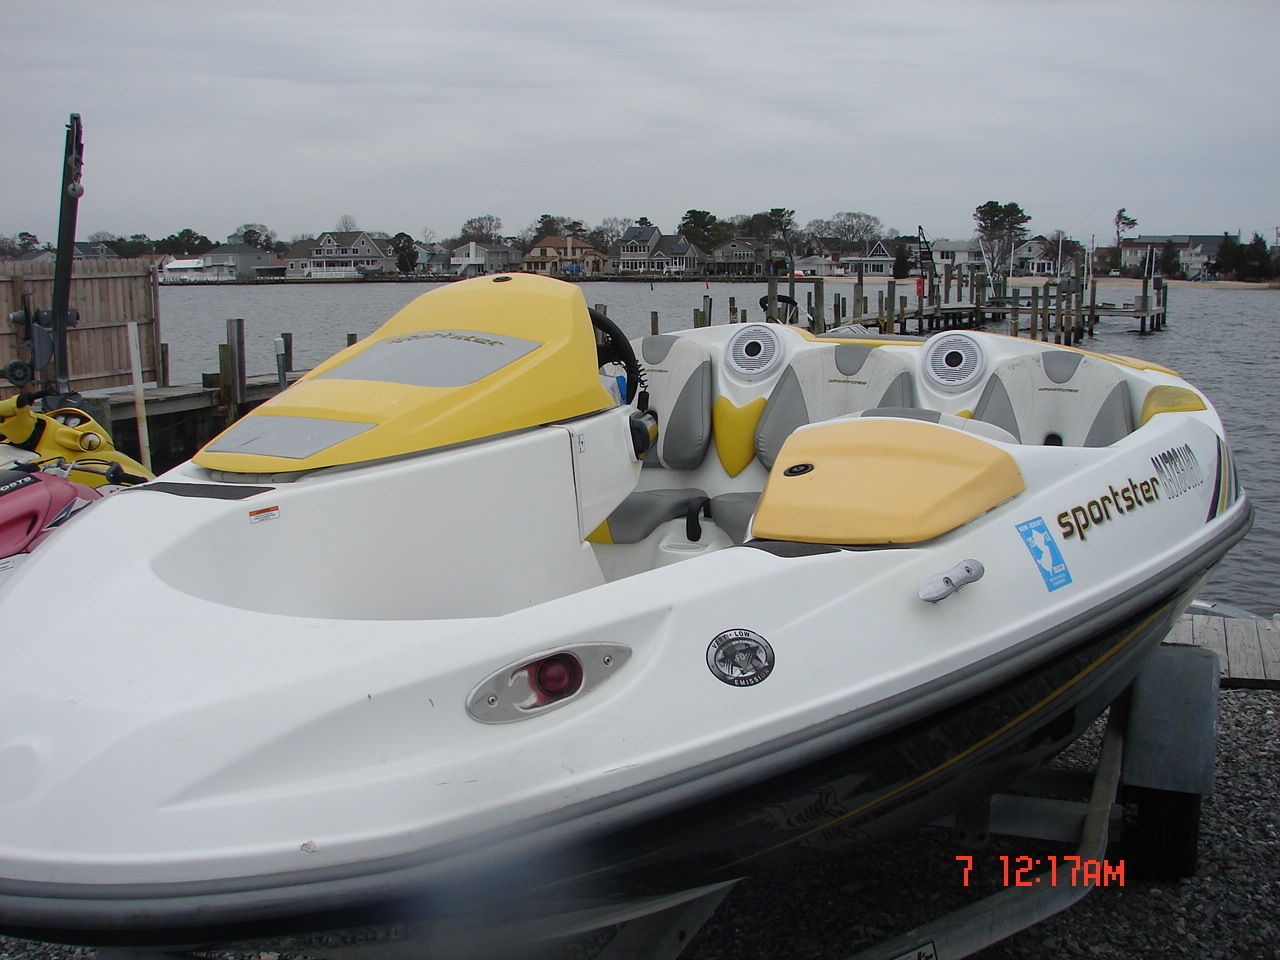 Sea Doo Speedster 150 2005 for sale for $5,500 - Boats ...